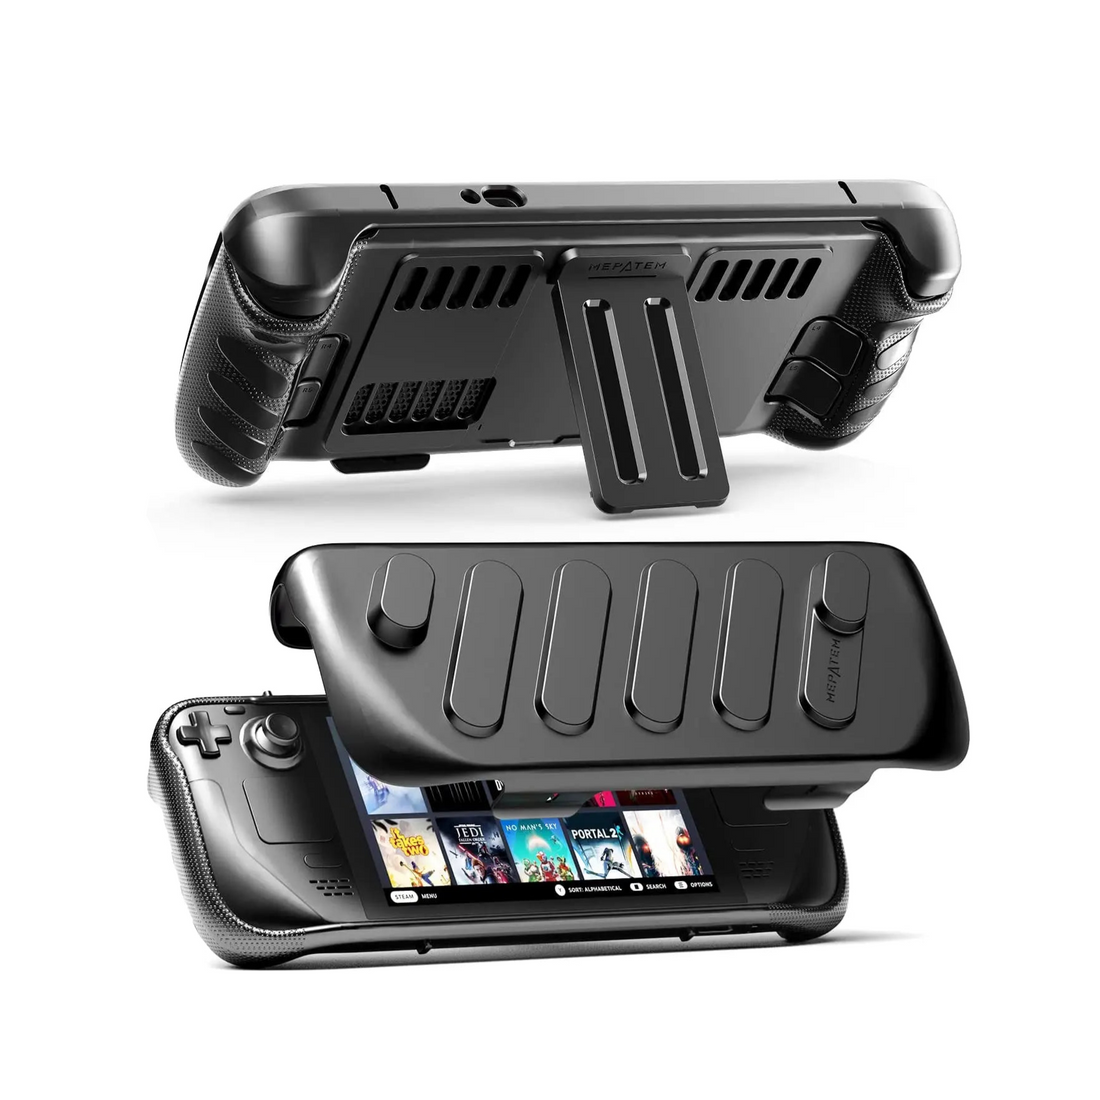 3-in-1 Protective Case with Kickstand and Front Cover for Steam Deck OLED